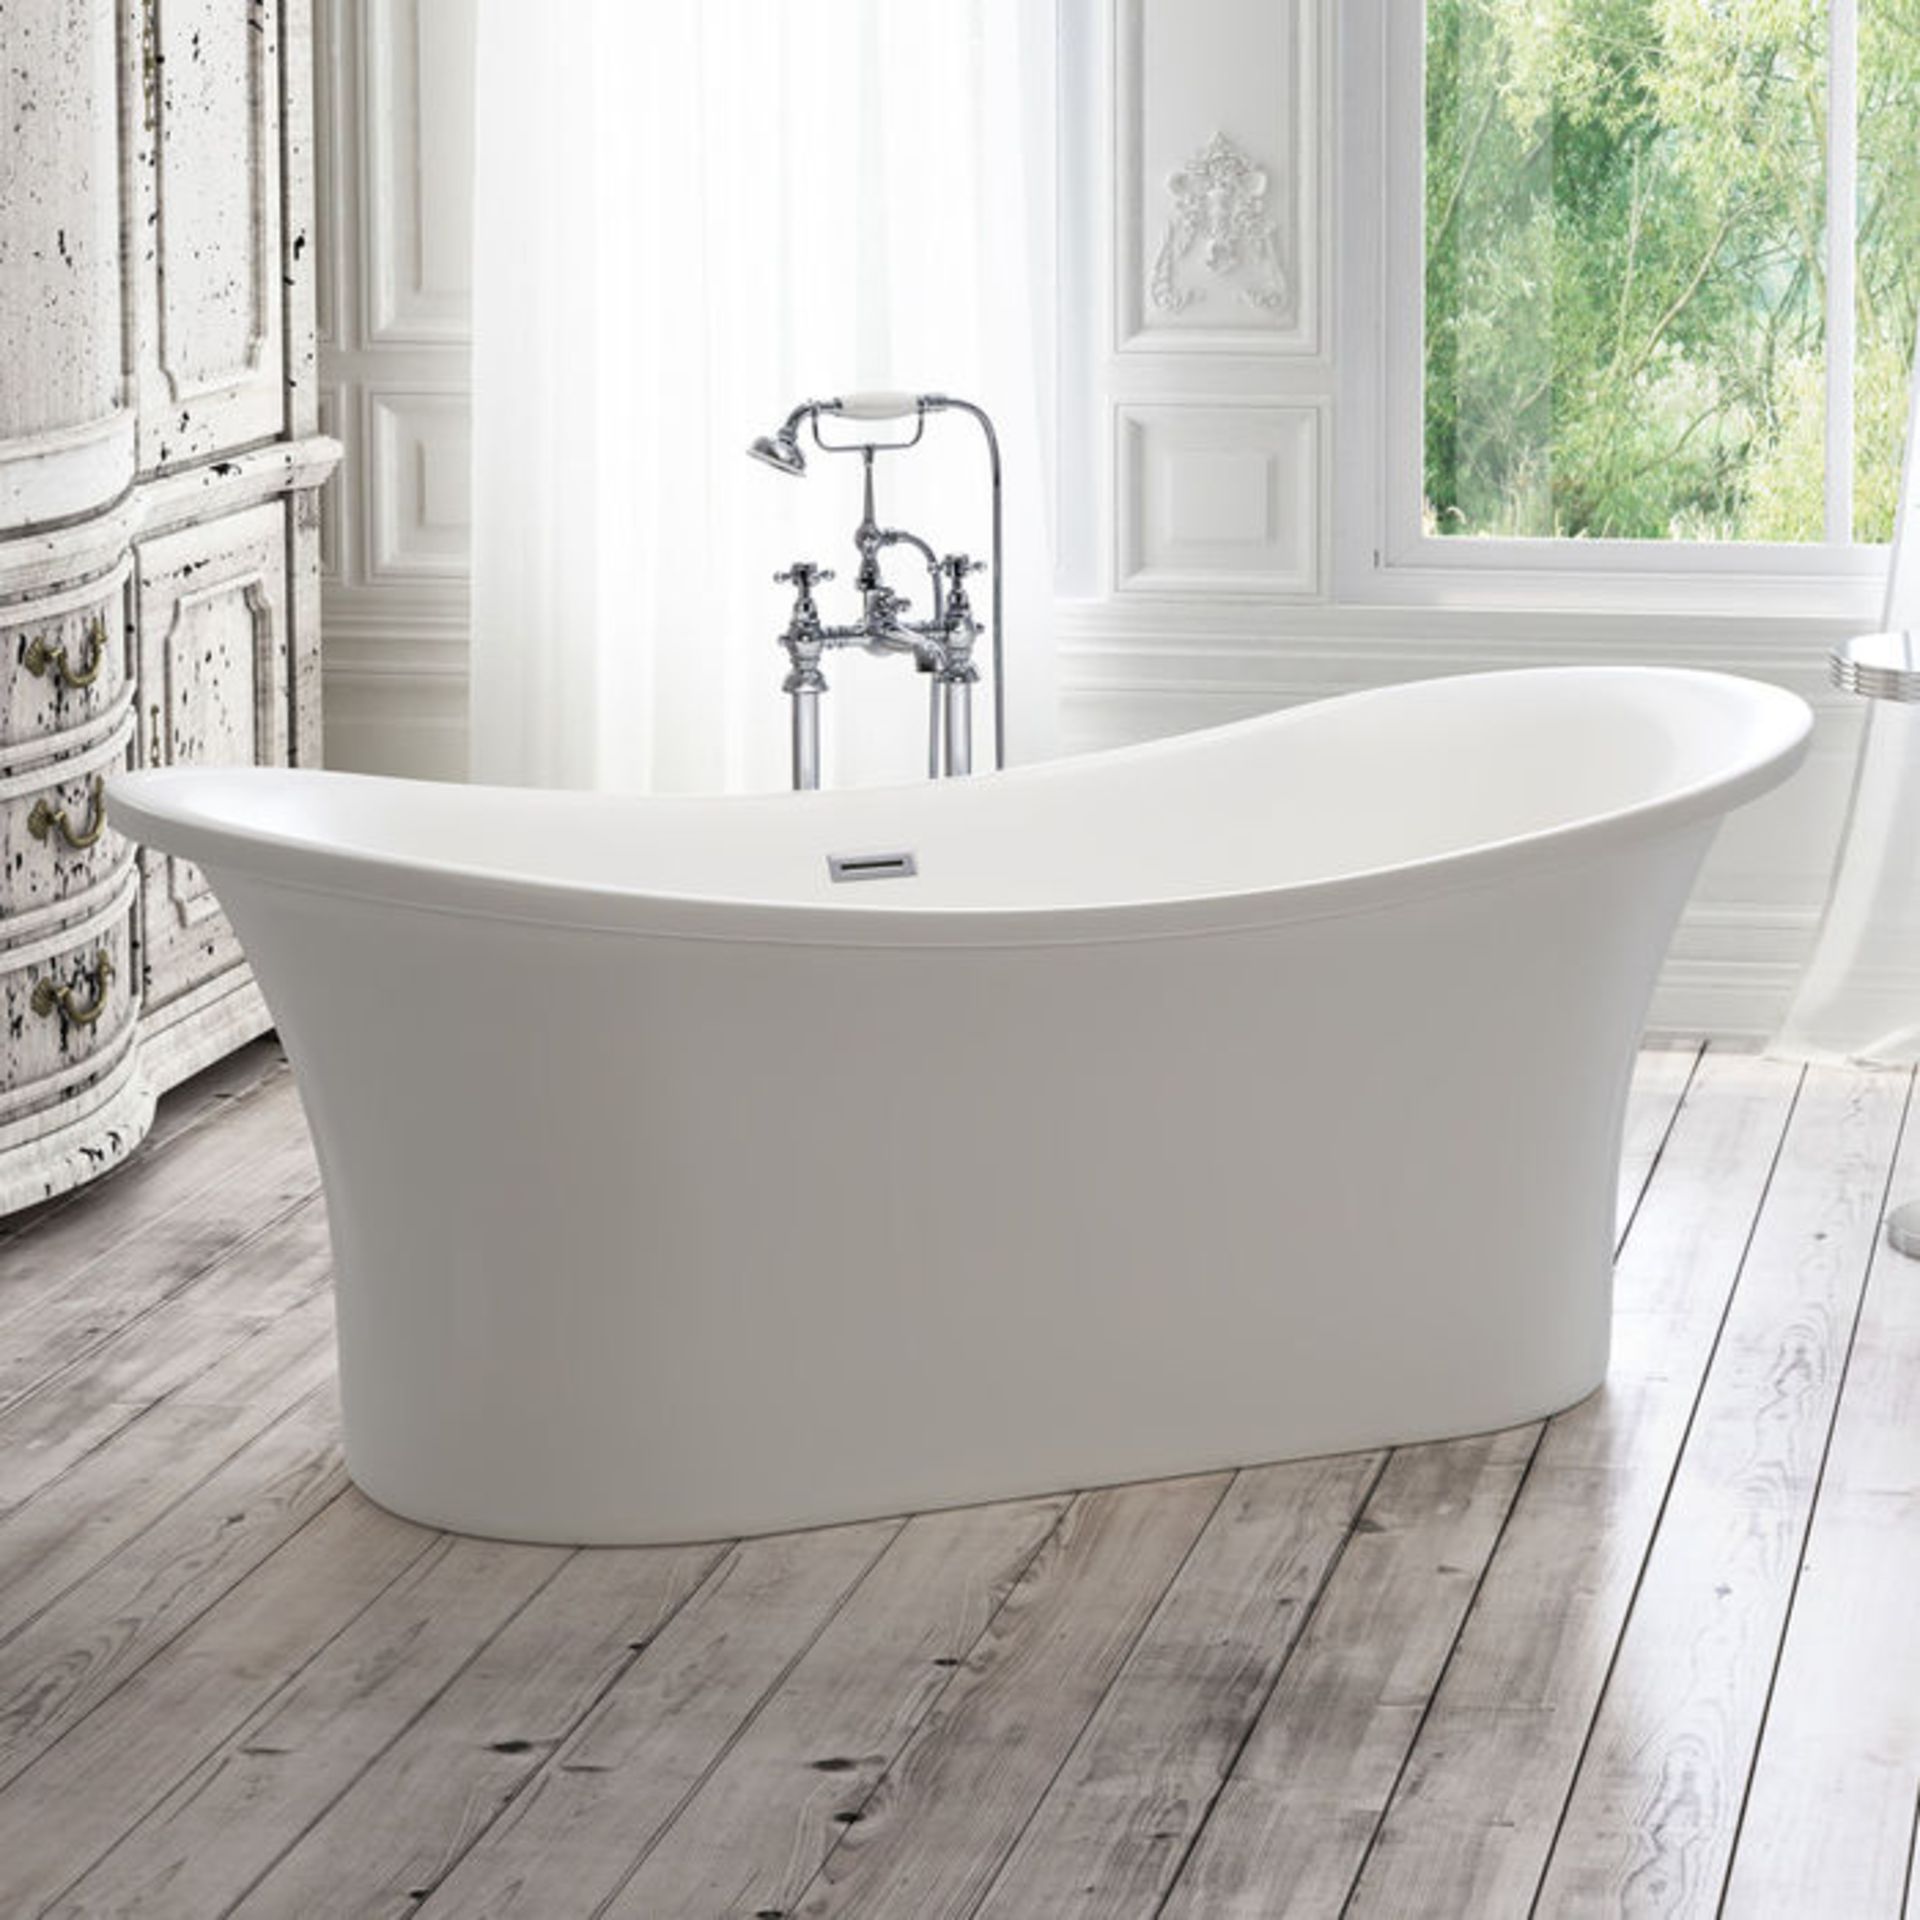 (AL4) 1815mmx800mm Freya Freestanding Bath. Manufactured from High Quality Acrylic, complimented